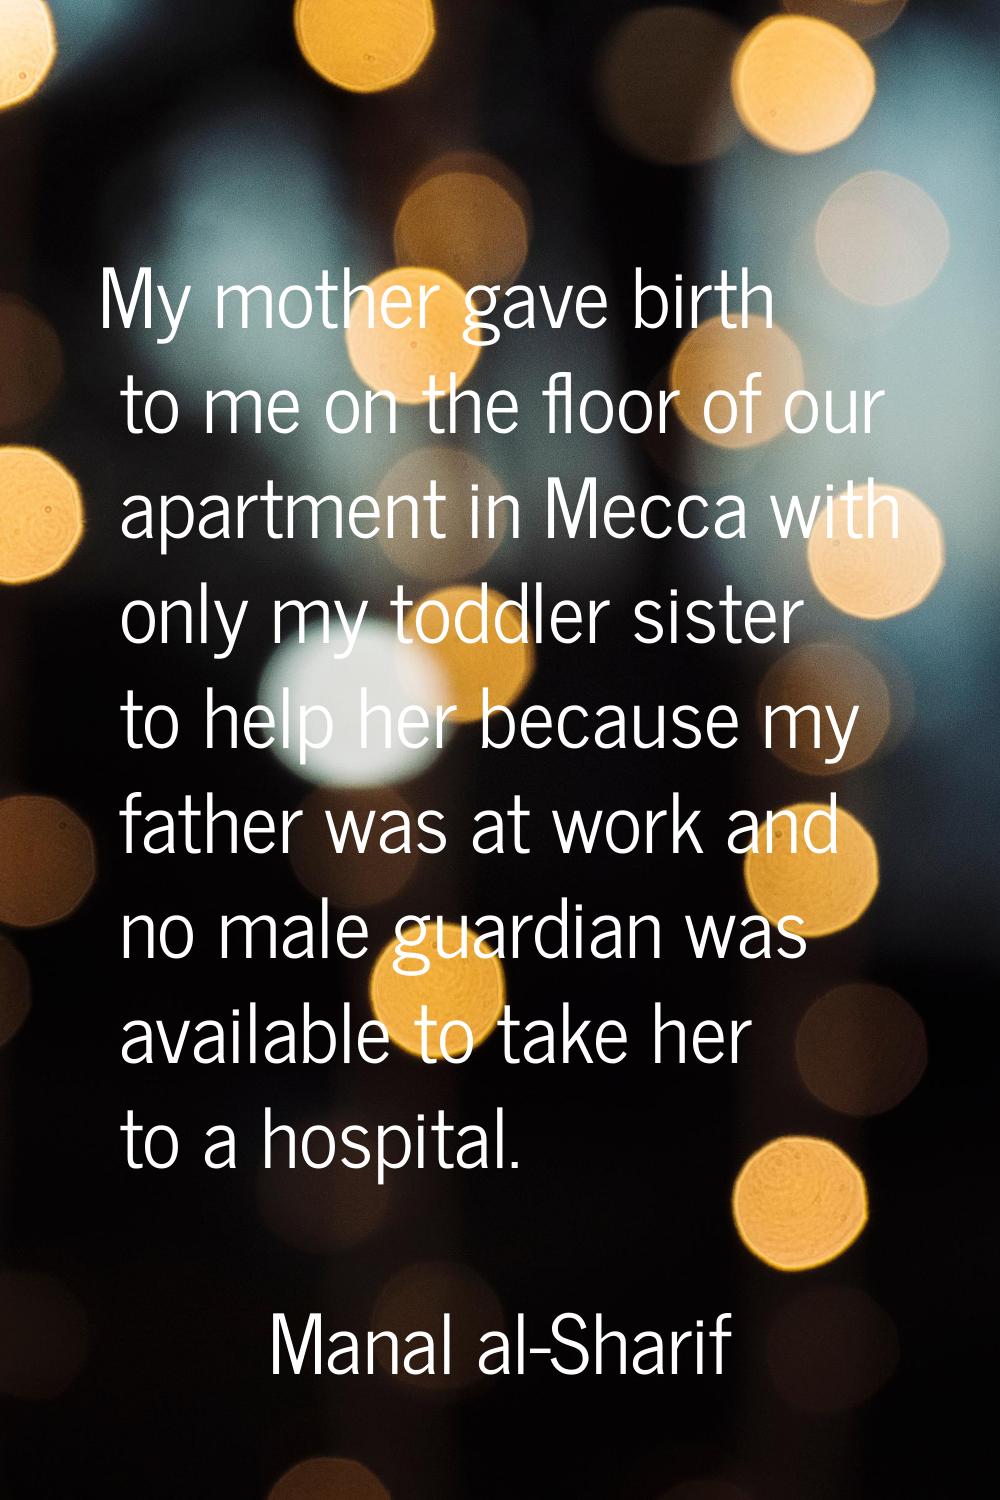 My mother gave birth to me on the floor of our apartment in Mecca with only my toddler sister to he